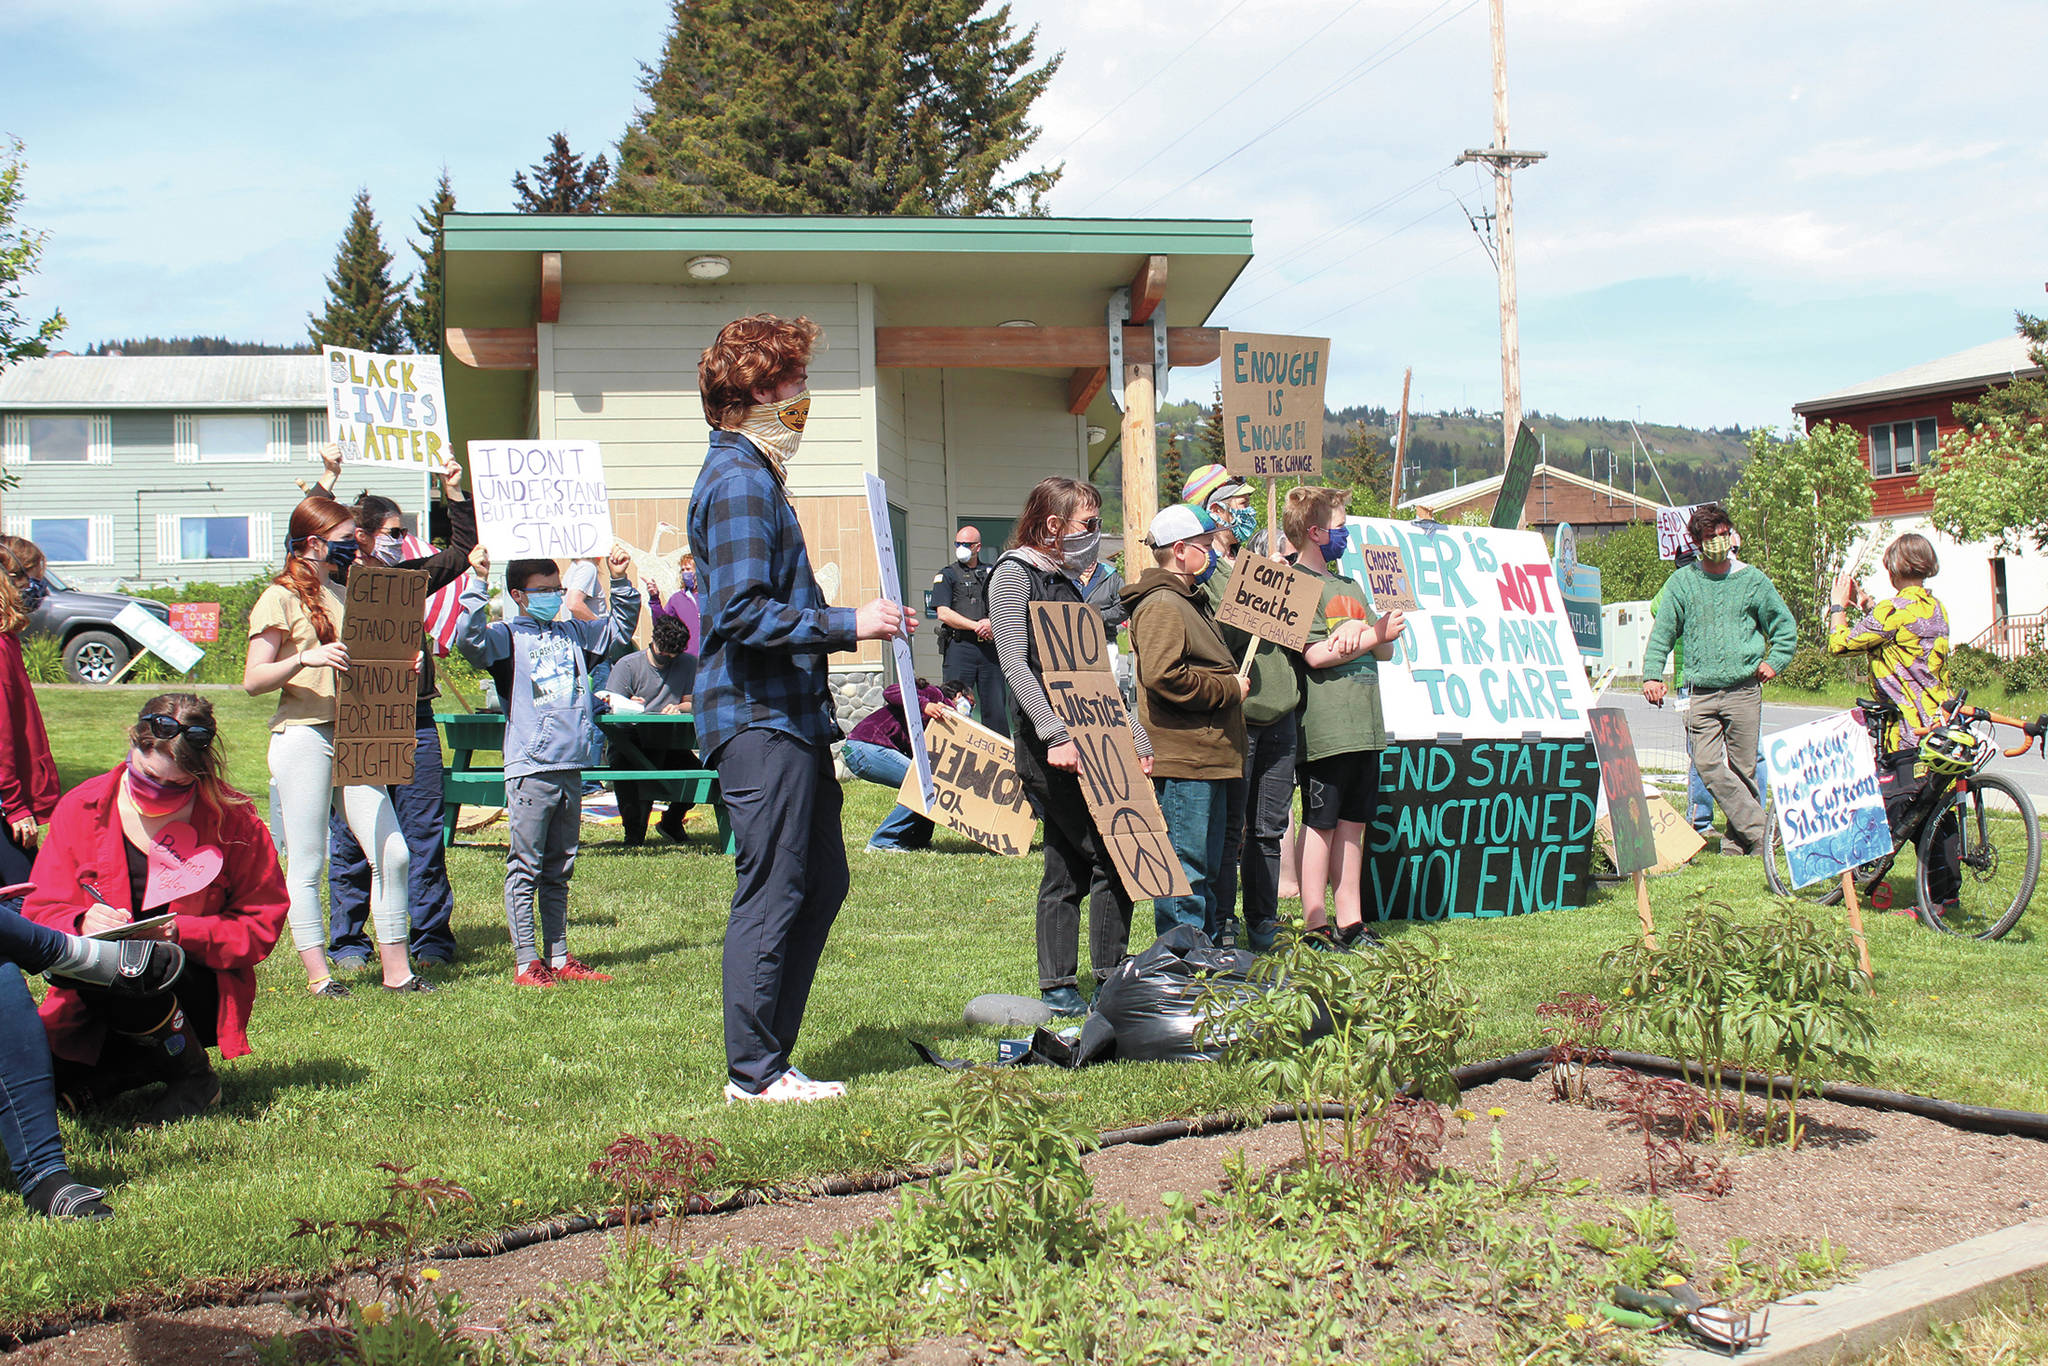 A group of locals protest at Wisdom, Knowledge, Faith and Love Park on Thursday, June 4, 2020 in Homer, Alaska. A local teacher organized a full week of daily protests supporting the Black Lives Matter movement at the park. (Photo by Megan Pacer/Homer News)